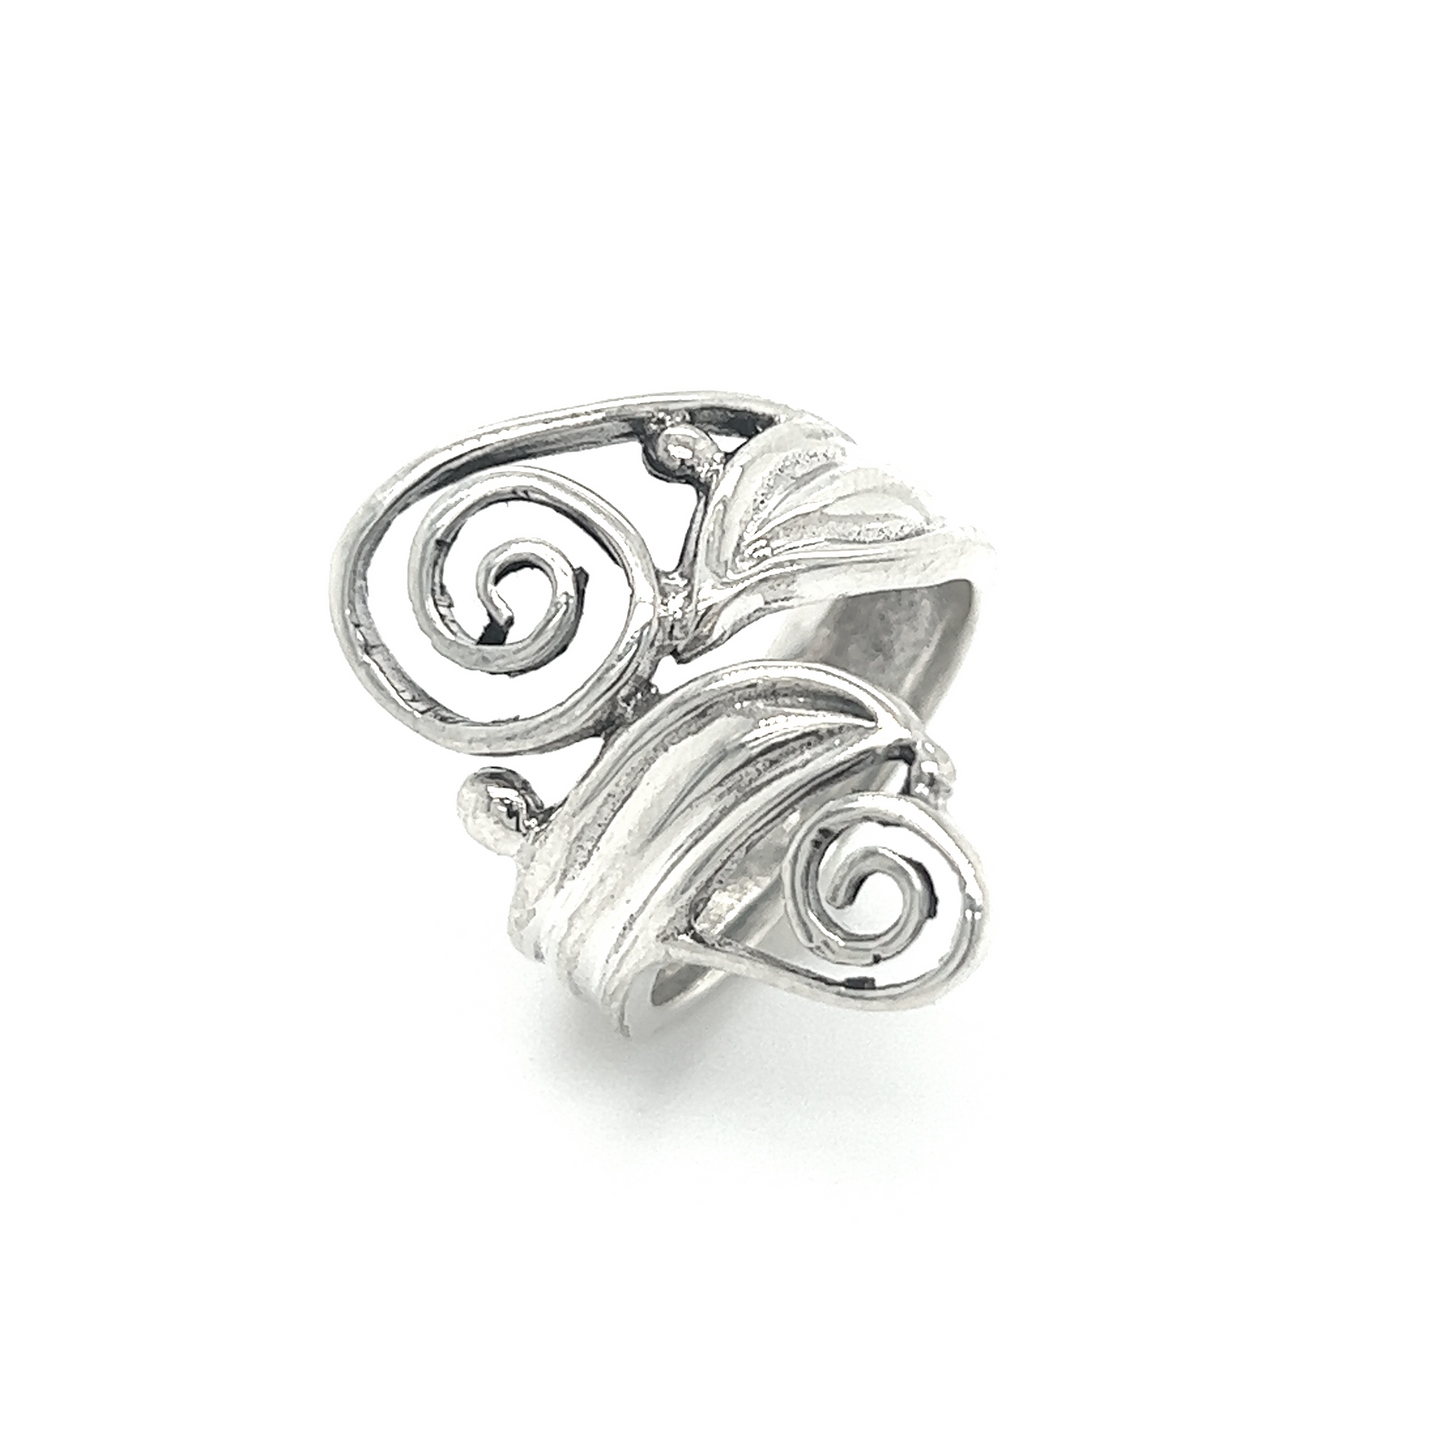 The Freeform Spiral Ring, crafted in a bohemian style, showcases individuality.